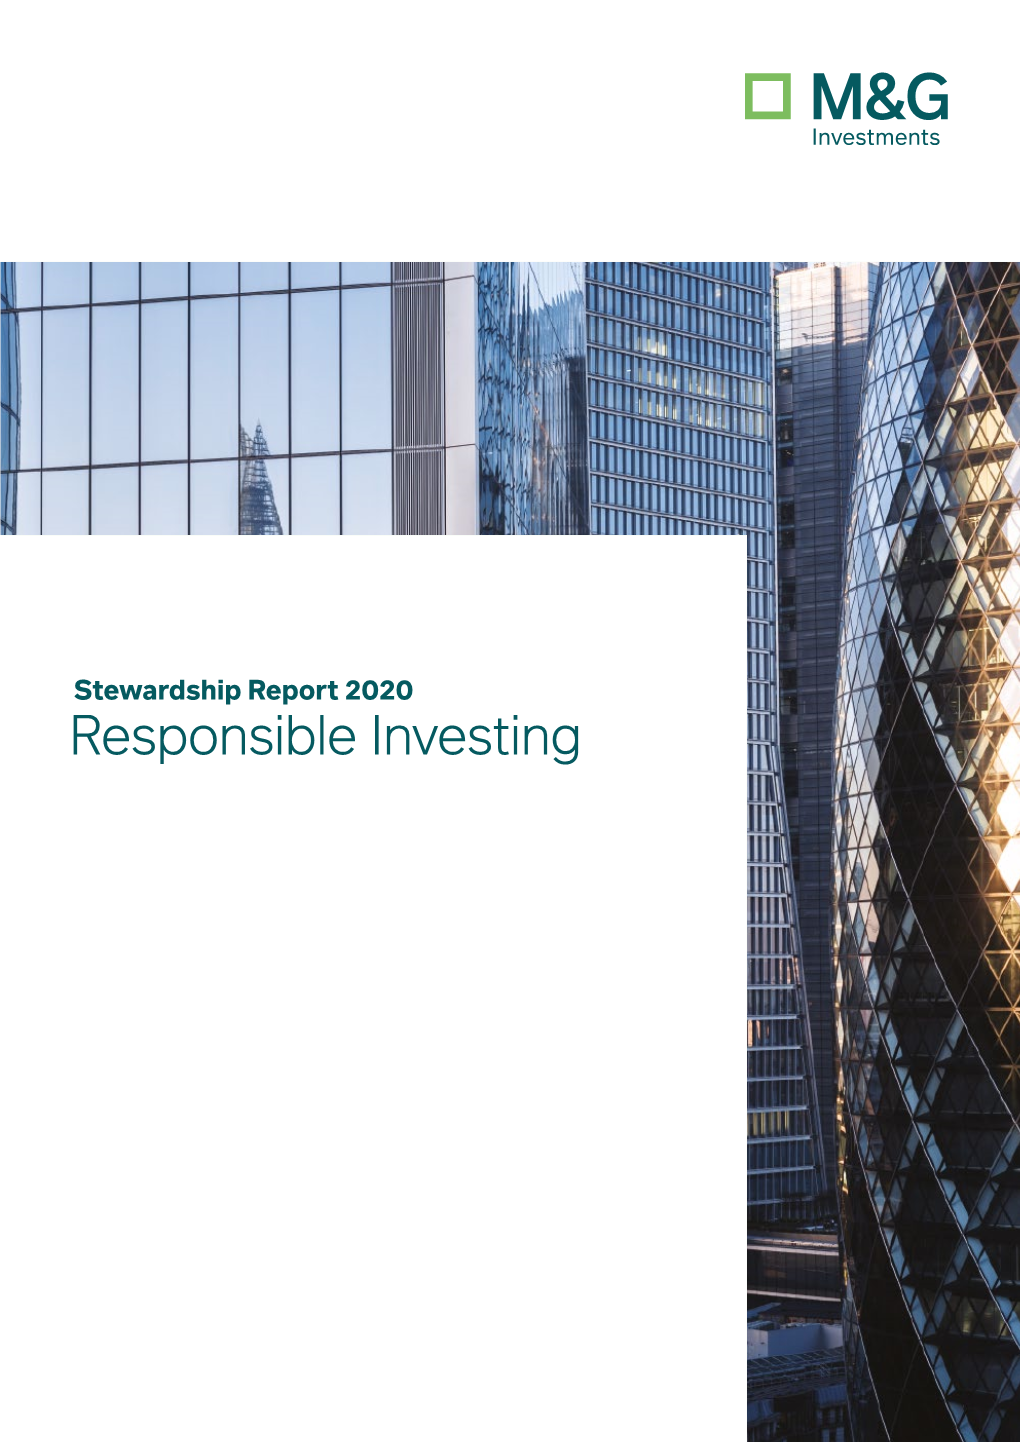 M&G Investments 2020 Annual Stewardship Report